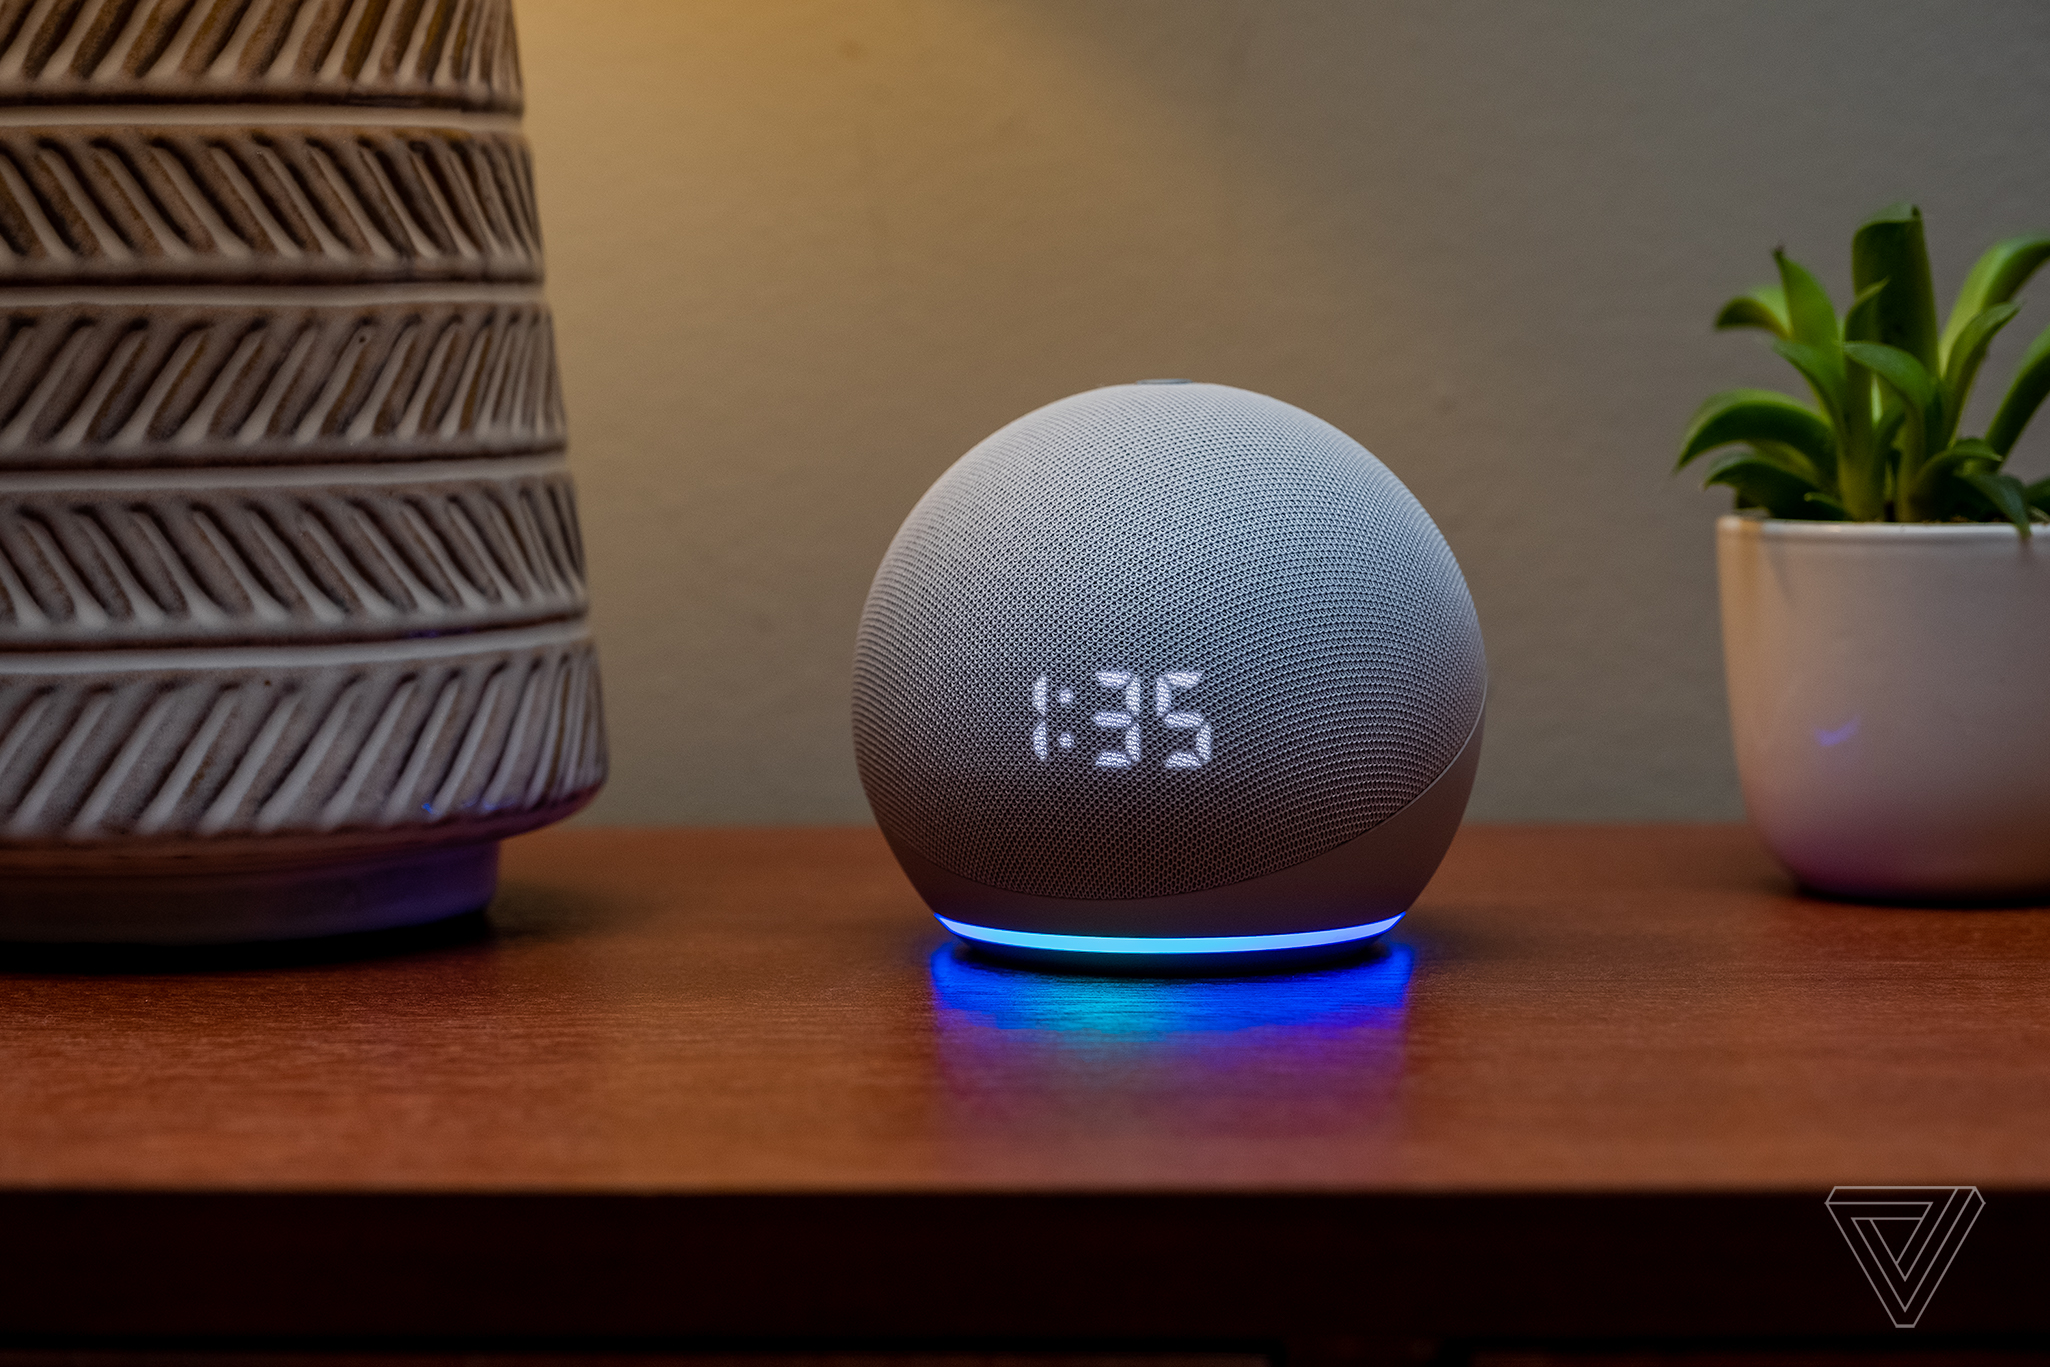 Why is my Alexa flashing green, red, orange, and yellow?